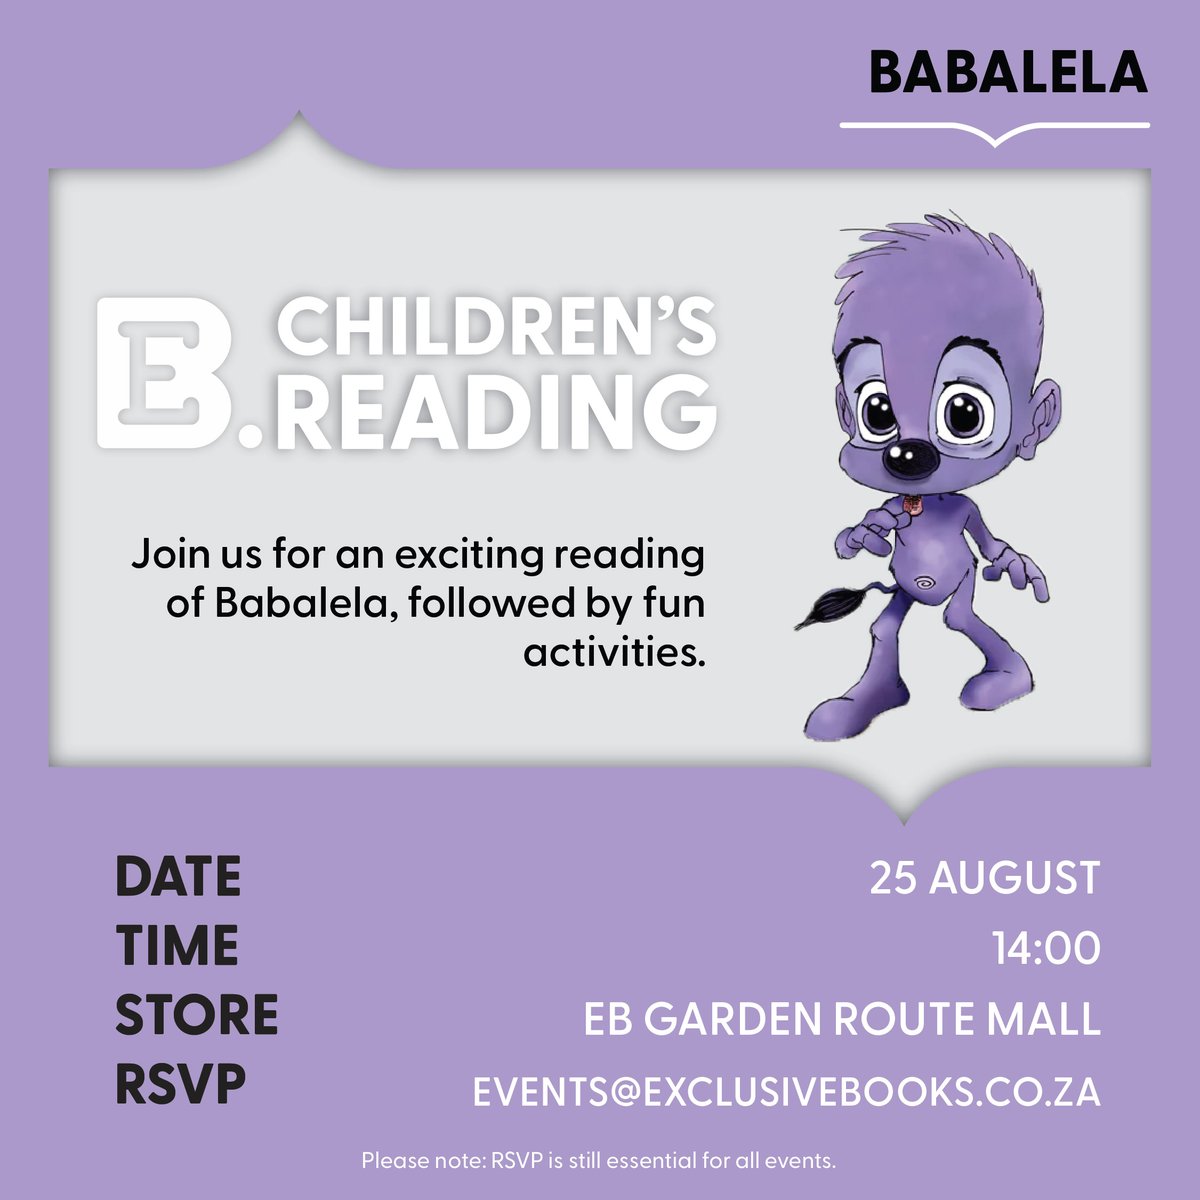 📍🗓️ Join us at EB @GardenRouteMall for an exciting children's reading of Babalela! RSVP is essential to events@exclusivebooks.co.za